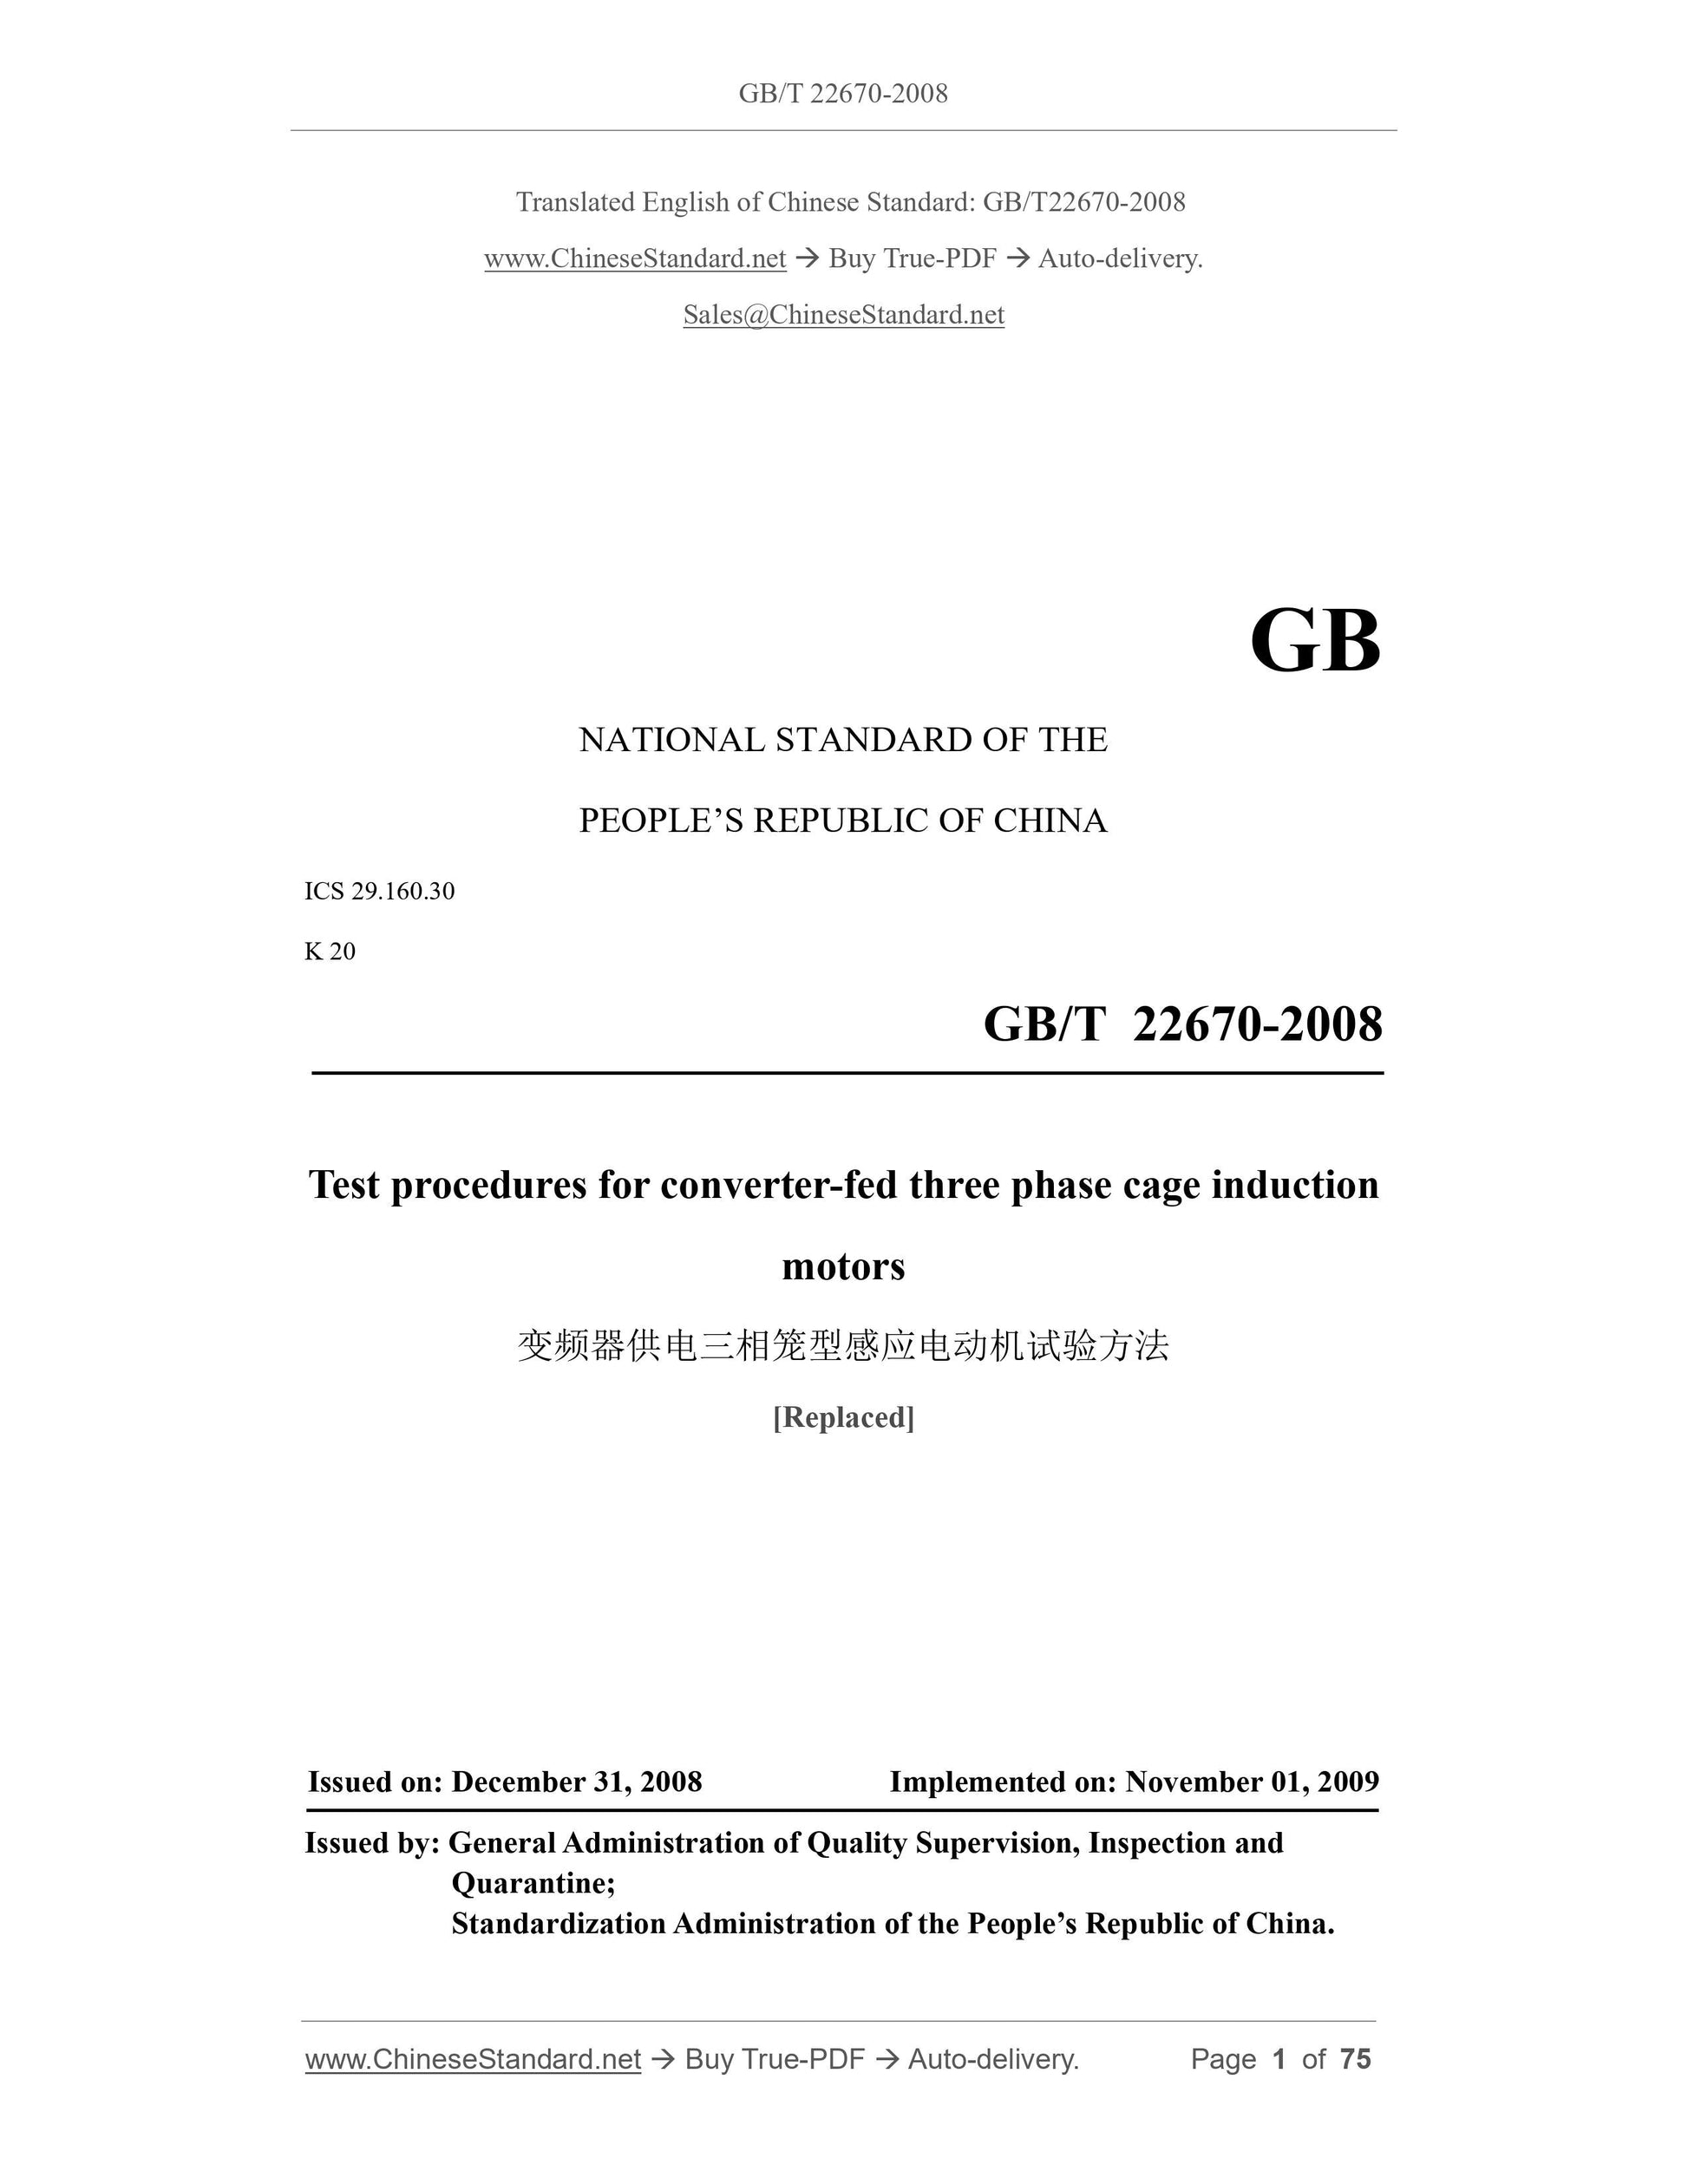 GB/T 22670-2008 Page 1